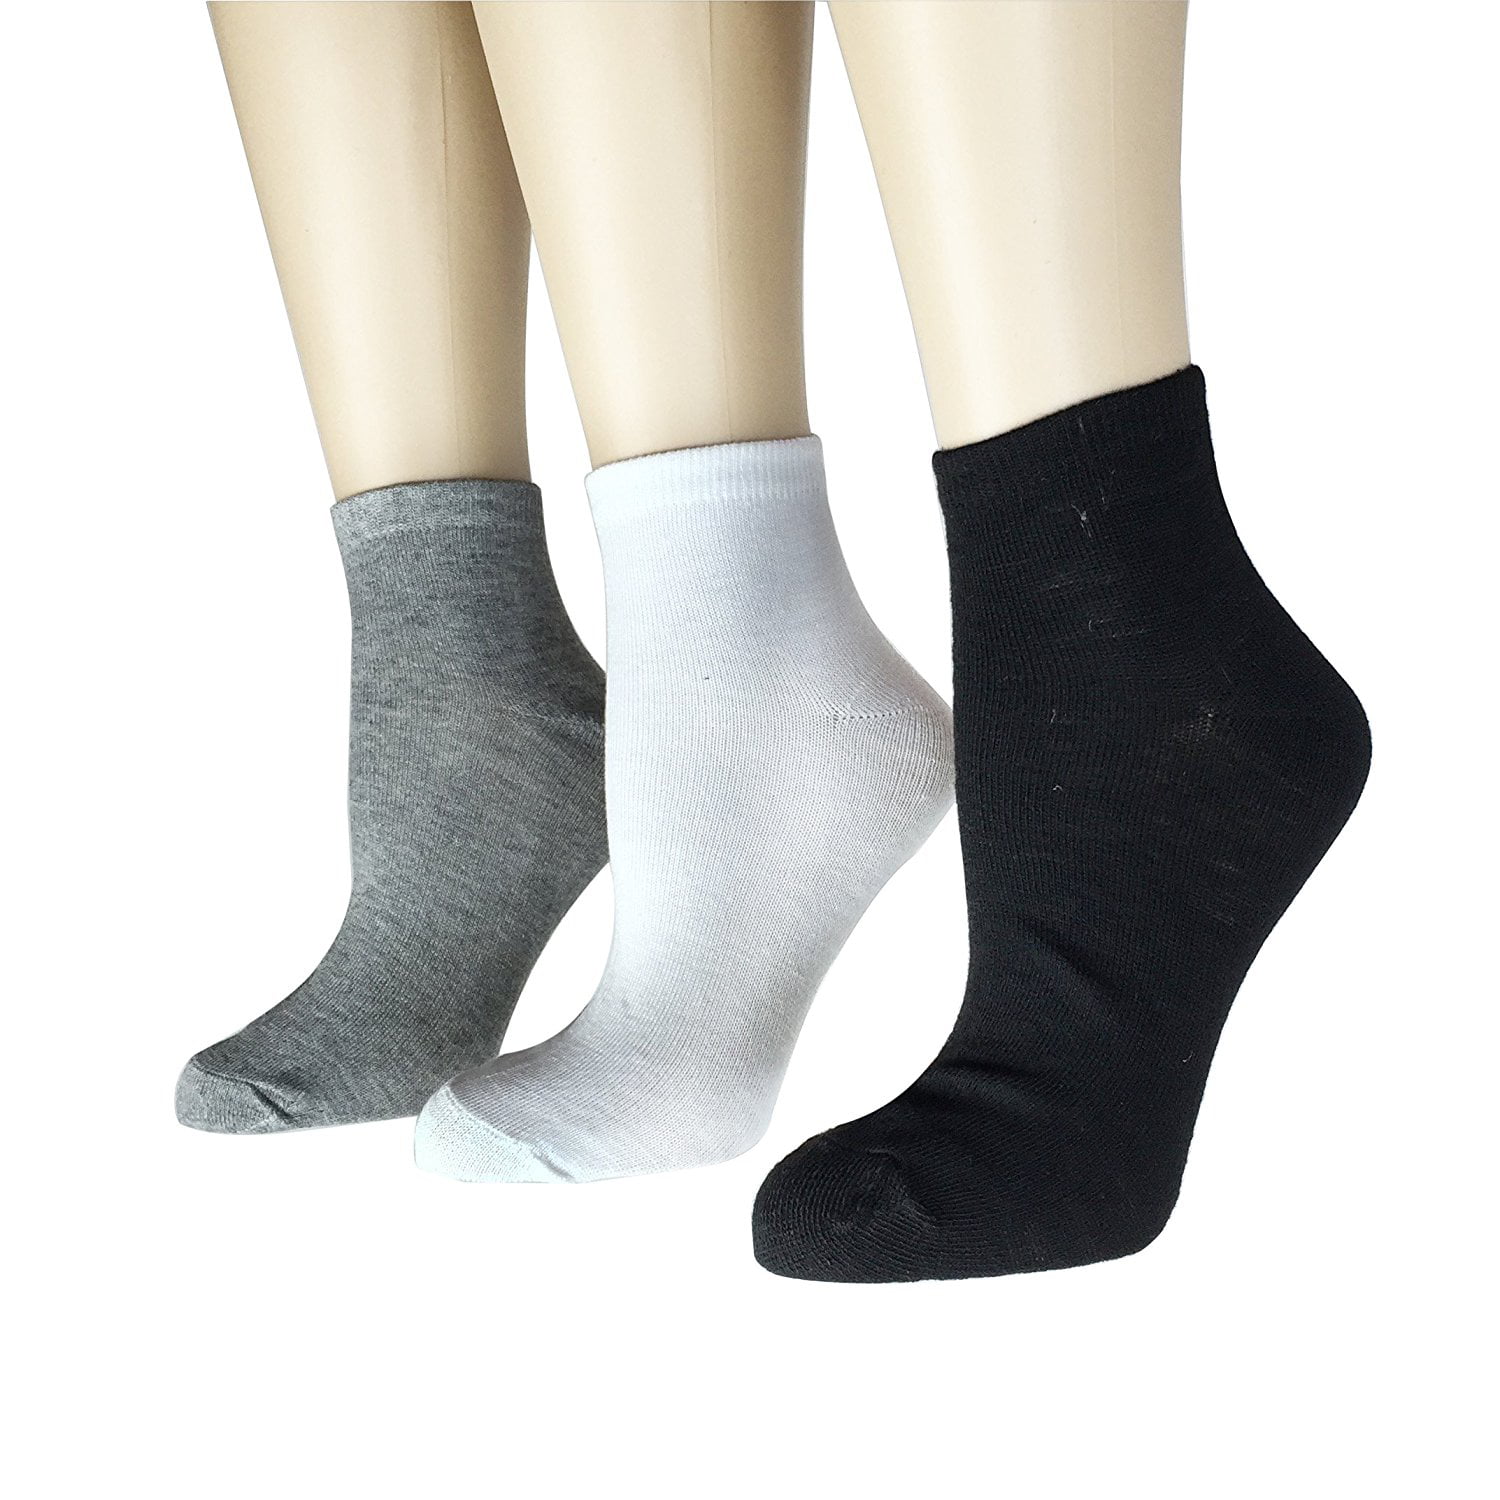 Women's 12 Pairs Socks Assorted Colors Size 6-9, Diff Patterns ...